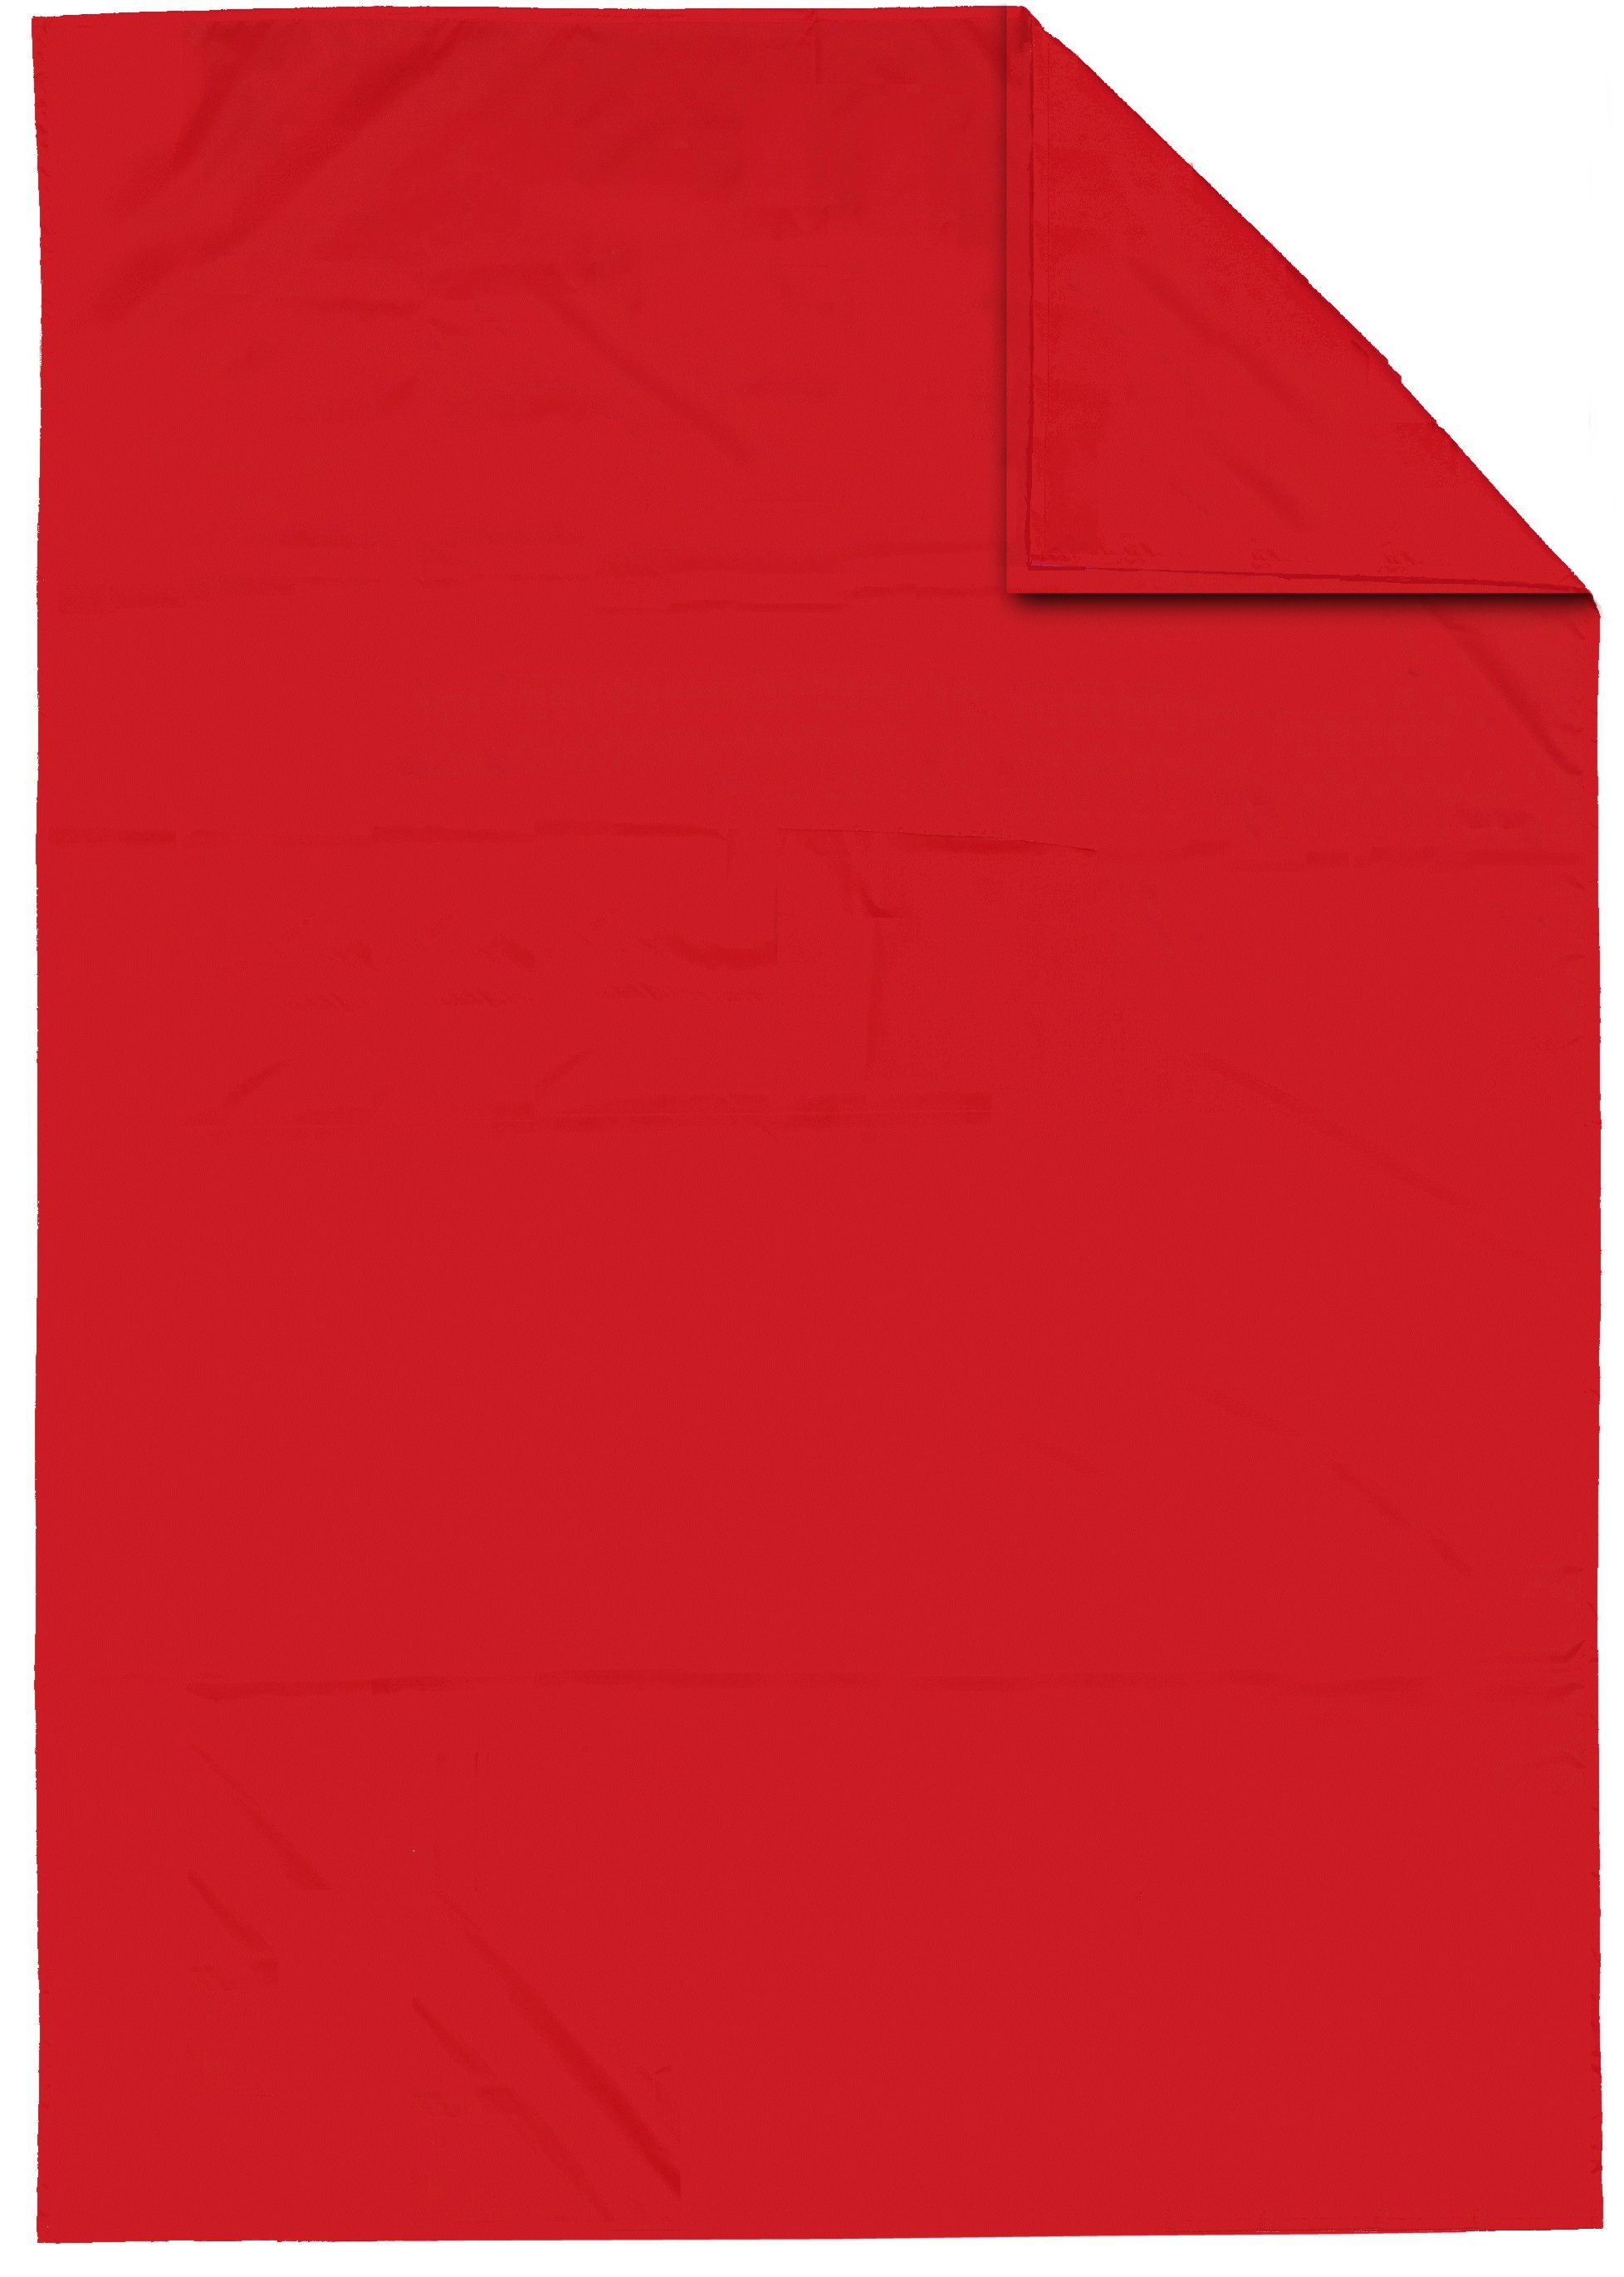 Red Transtex Transfer Sheet Without Handles